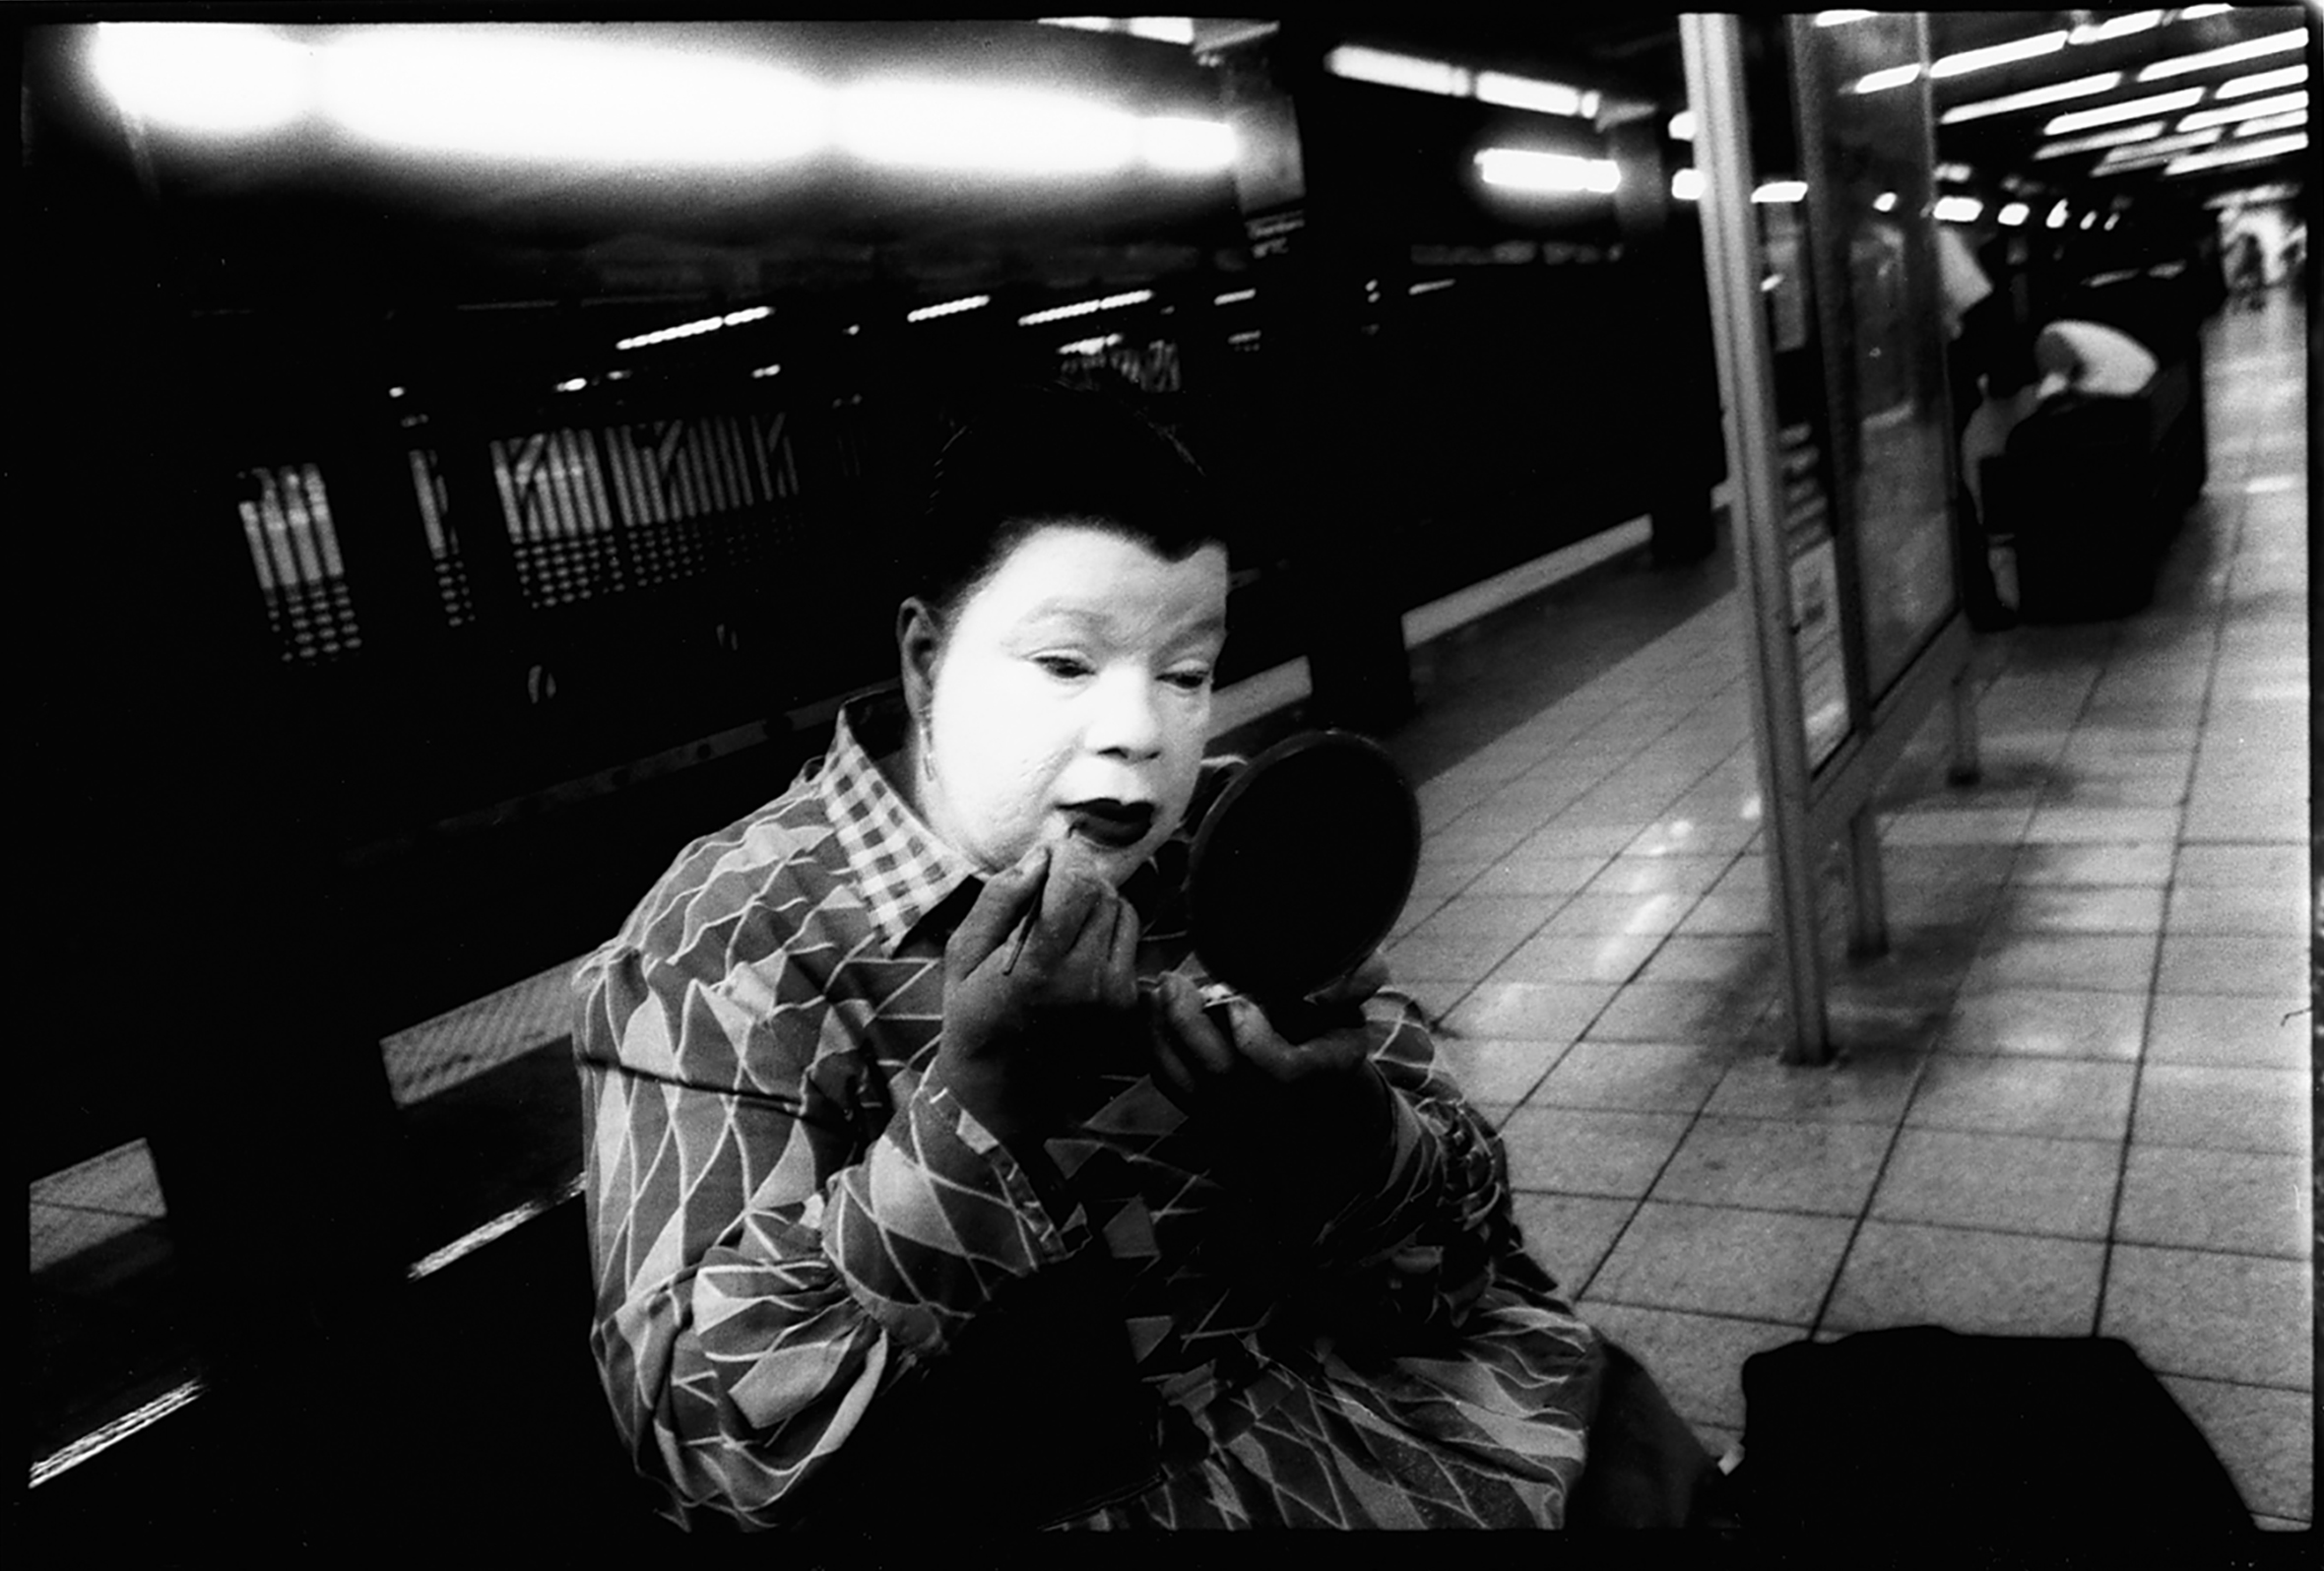 A man in white kabuki makeup sits on a subway bench and applies dark lip color with a long-handled brush as he looks into a circular handheld mirror. His glossy, black, pulled-back hair highlights a widow’s peak accentuated by the white makeup.